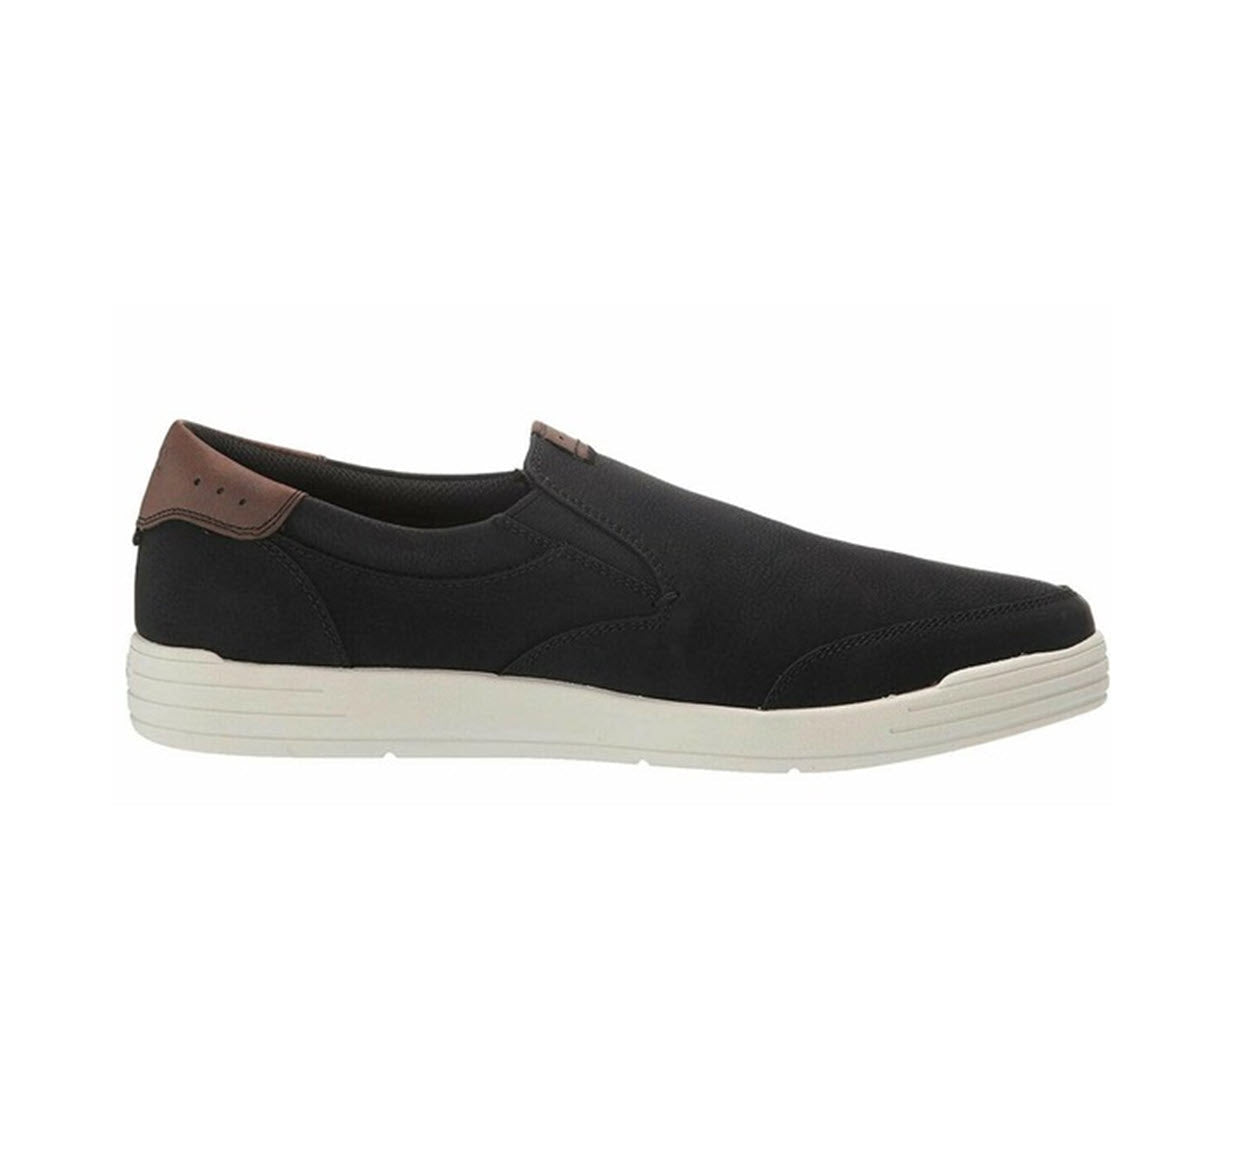 NUNN BUSH KORE CITY WALK SLIP-ON shoe with a lightweight EVA/rubber sole and a brown leather accent on the heel, set against a plain white background.